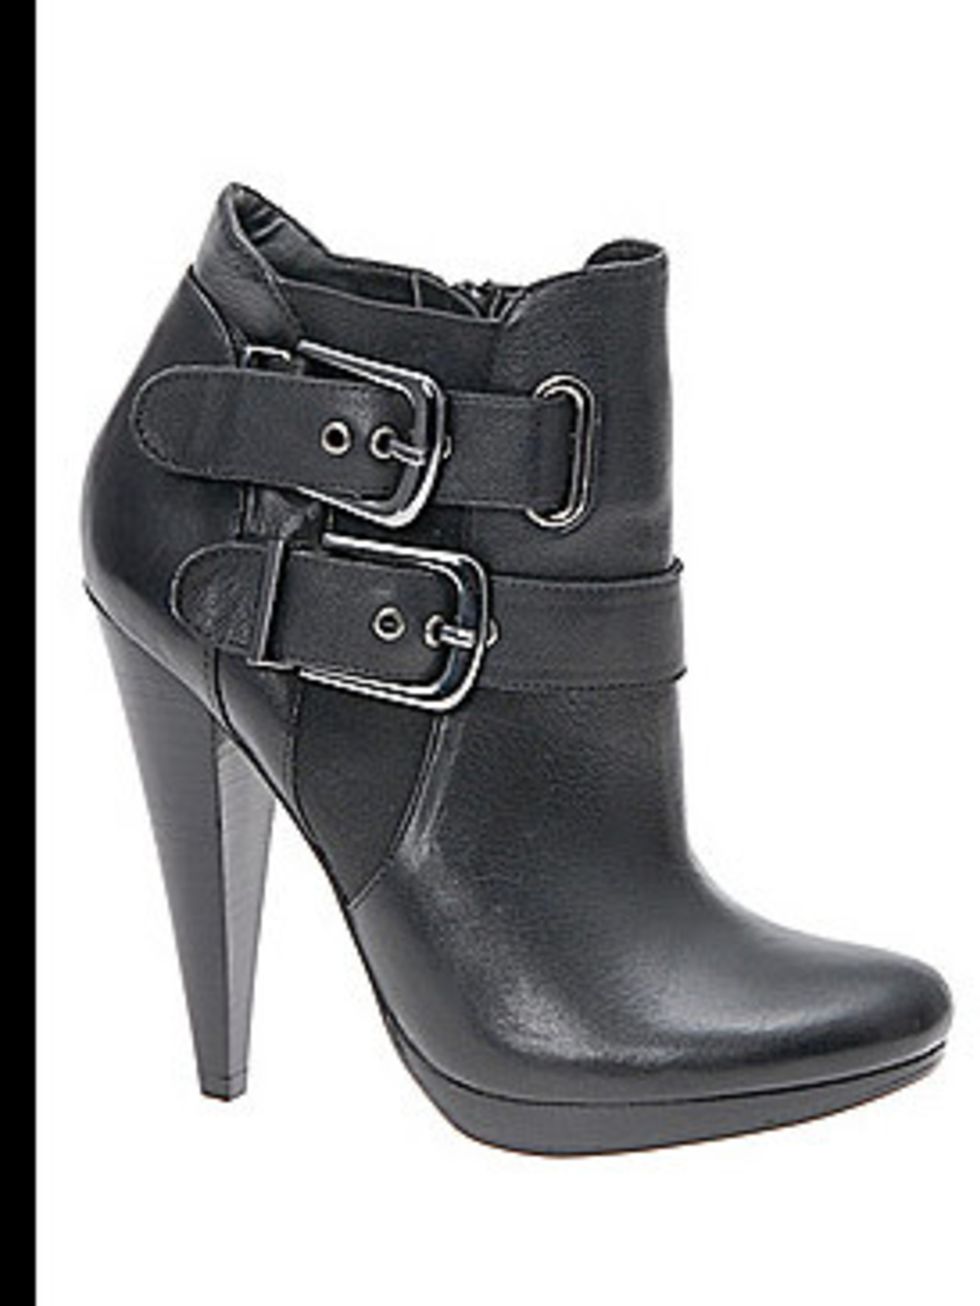 <p>Leather ankle boots, £85 by <a href="http://www.aldoshoes.com/uk/women/boots/ankle-boots/75977764-huckeby/97">Aldo</a></p>